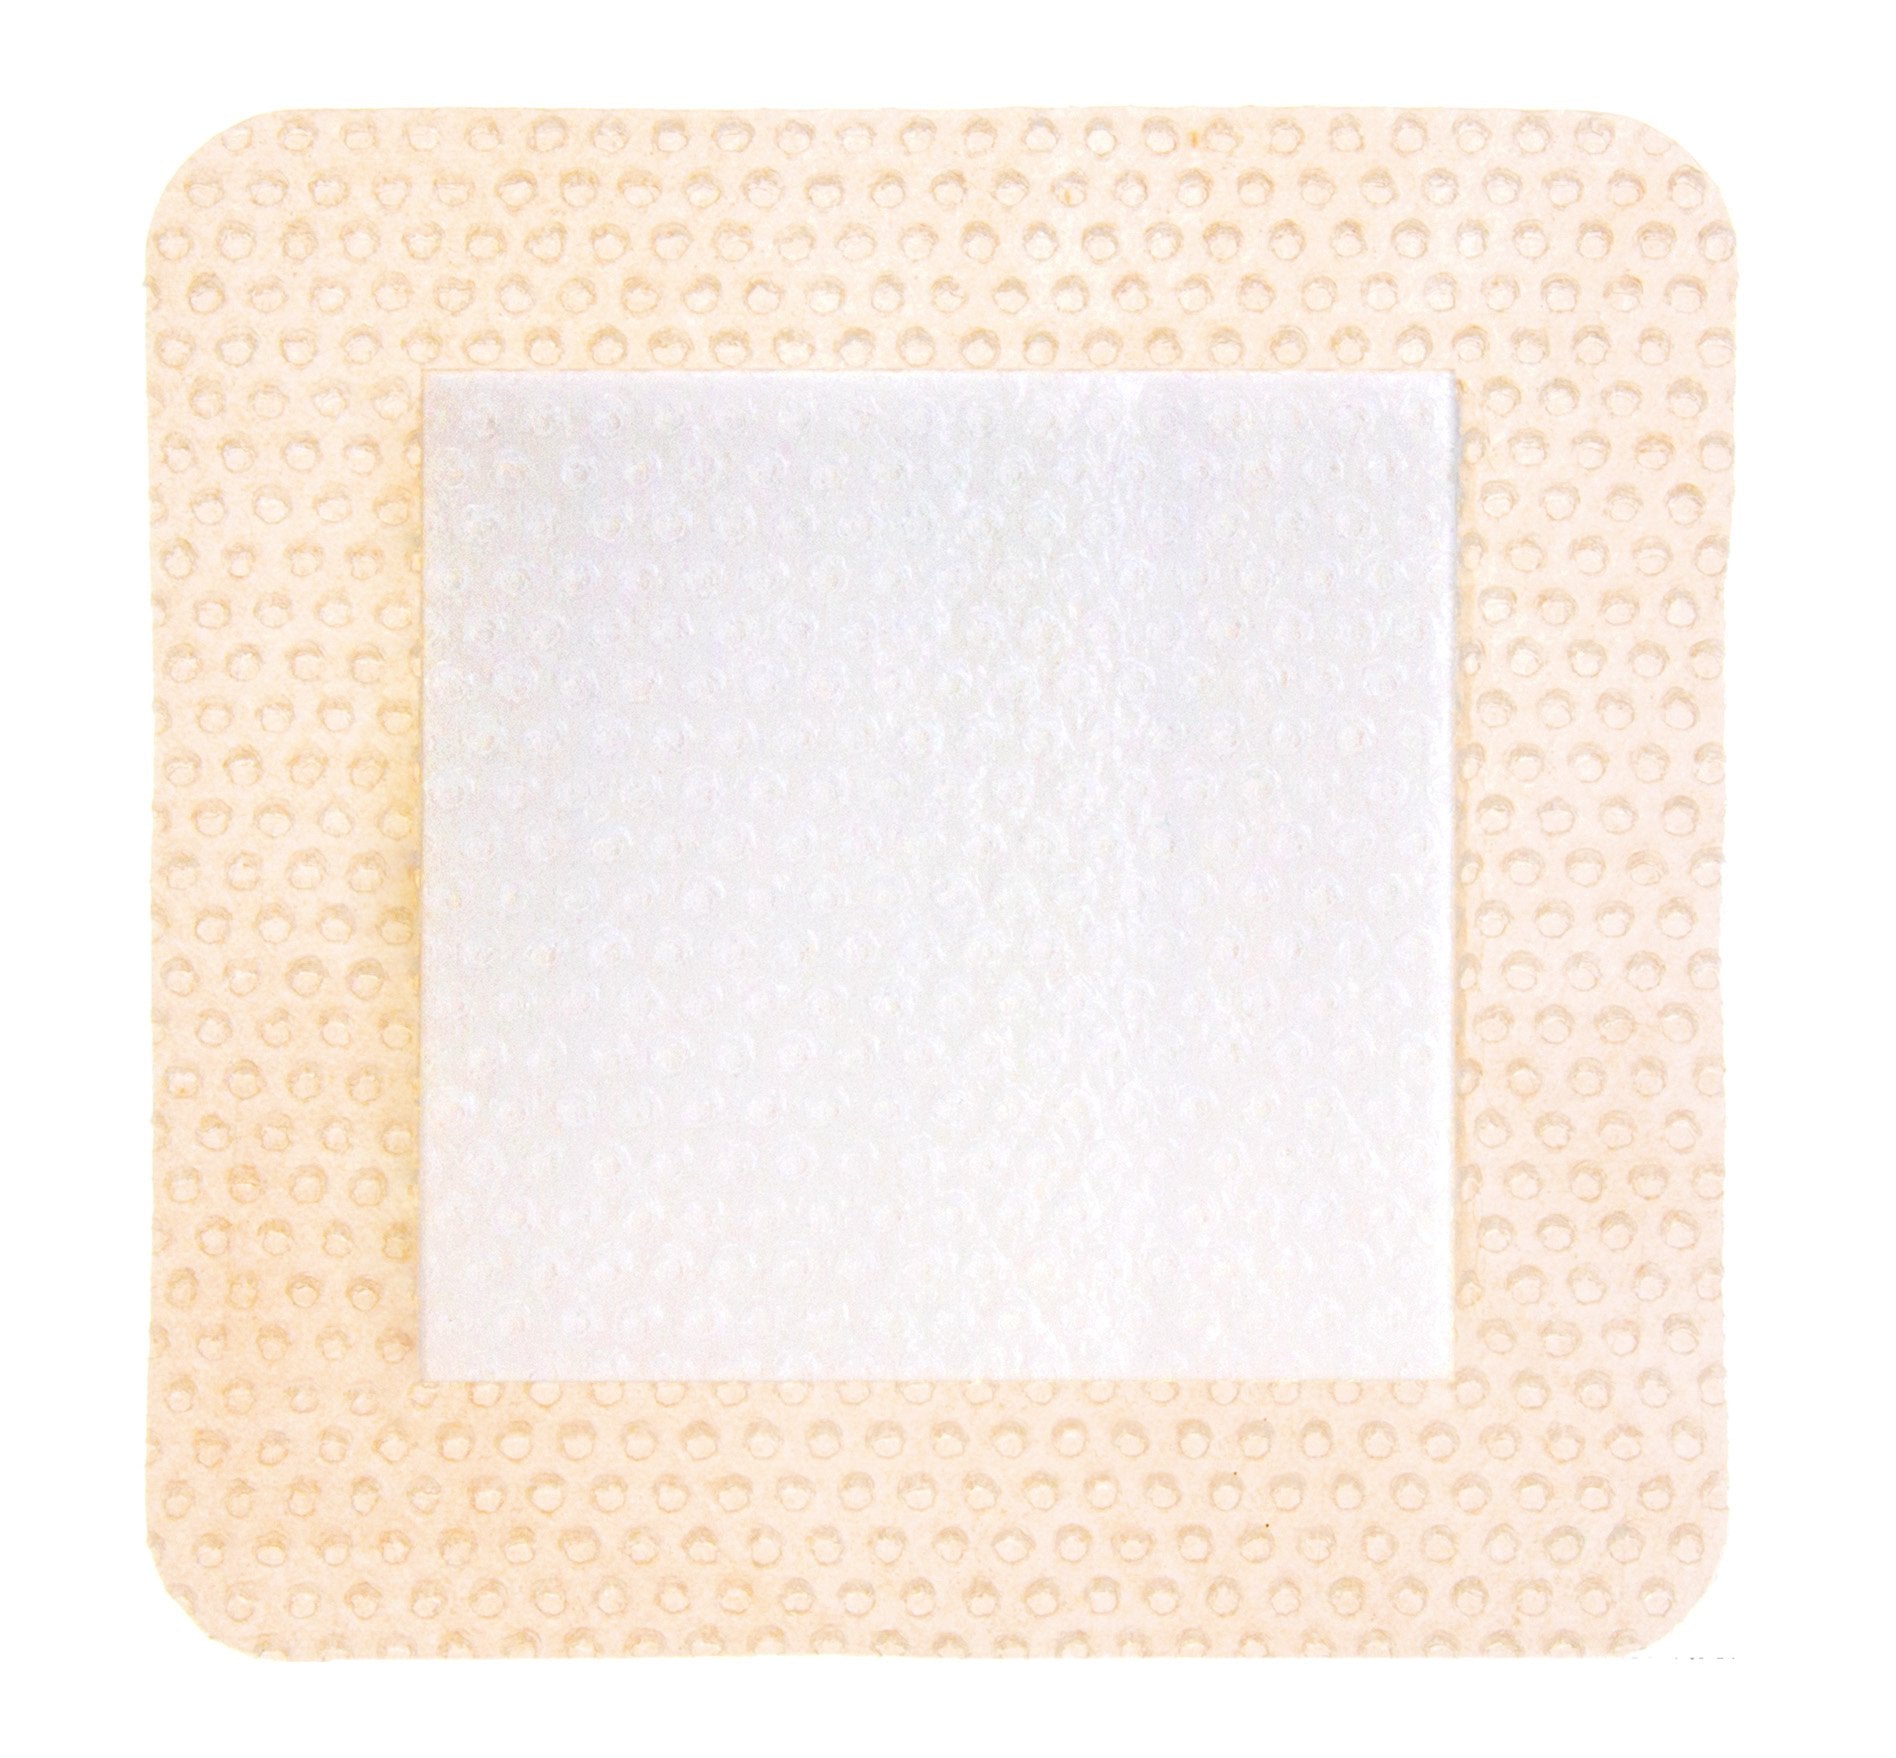 Wound Care>Wound Dressings>Silicone - McKesson - Wasatch Medical Supply